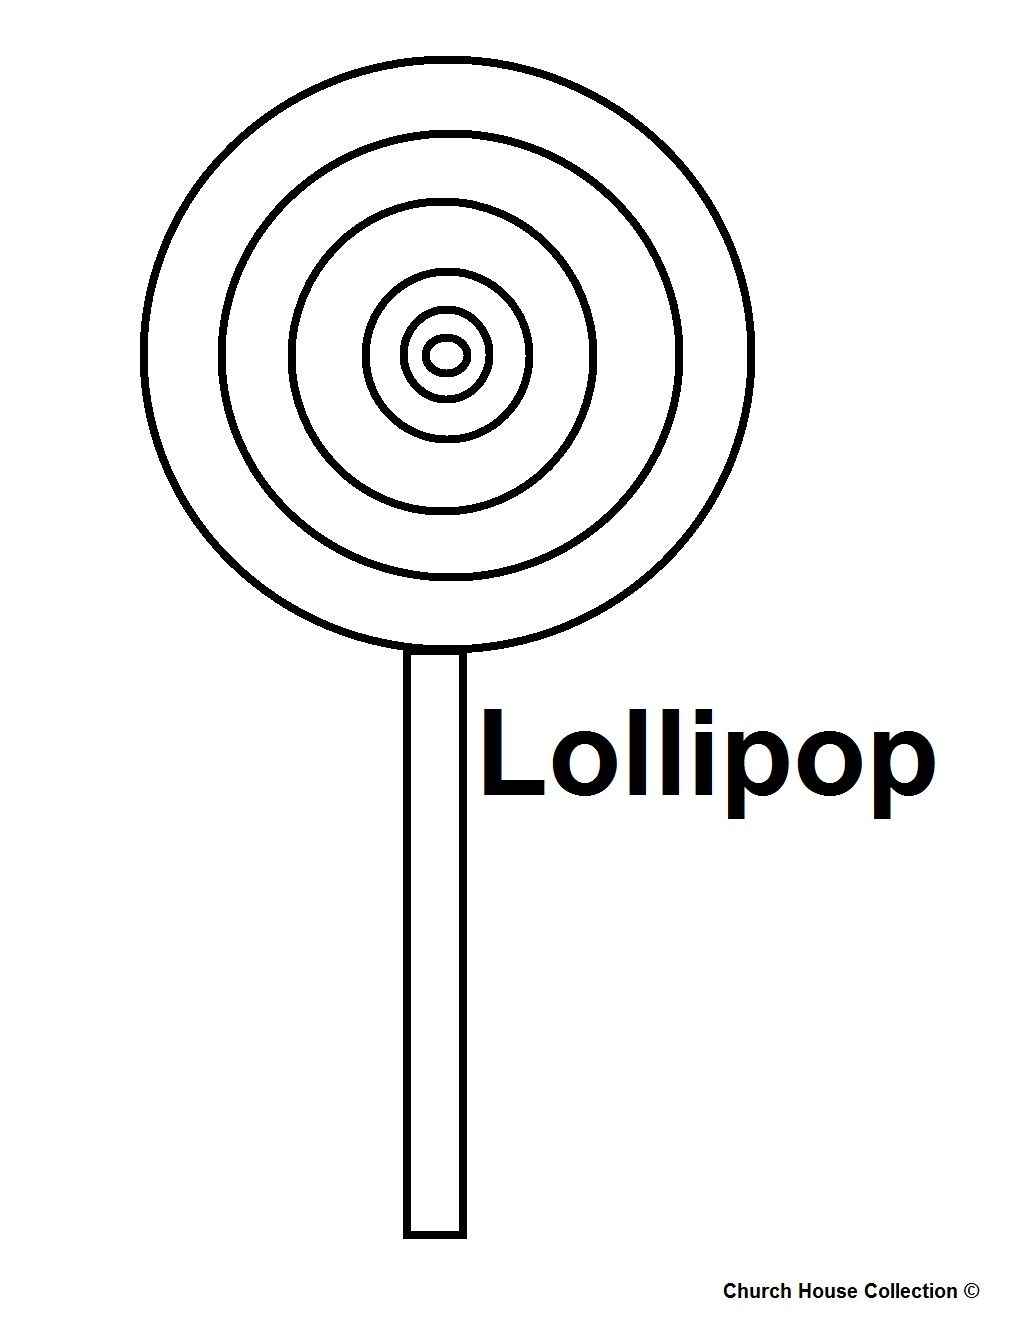 Coloring pages, Lollipop, Coloring pages for kids